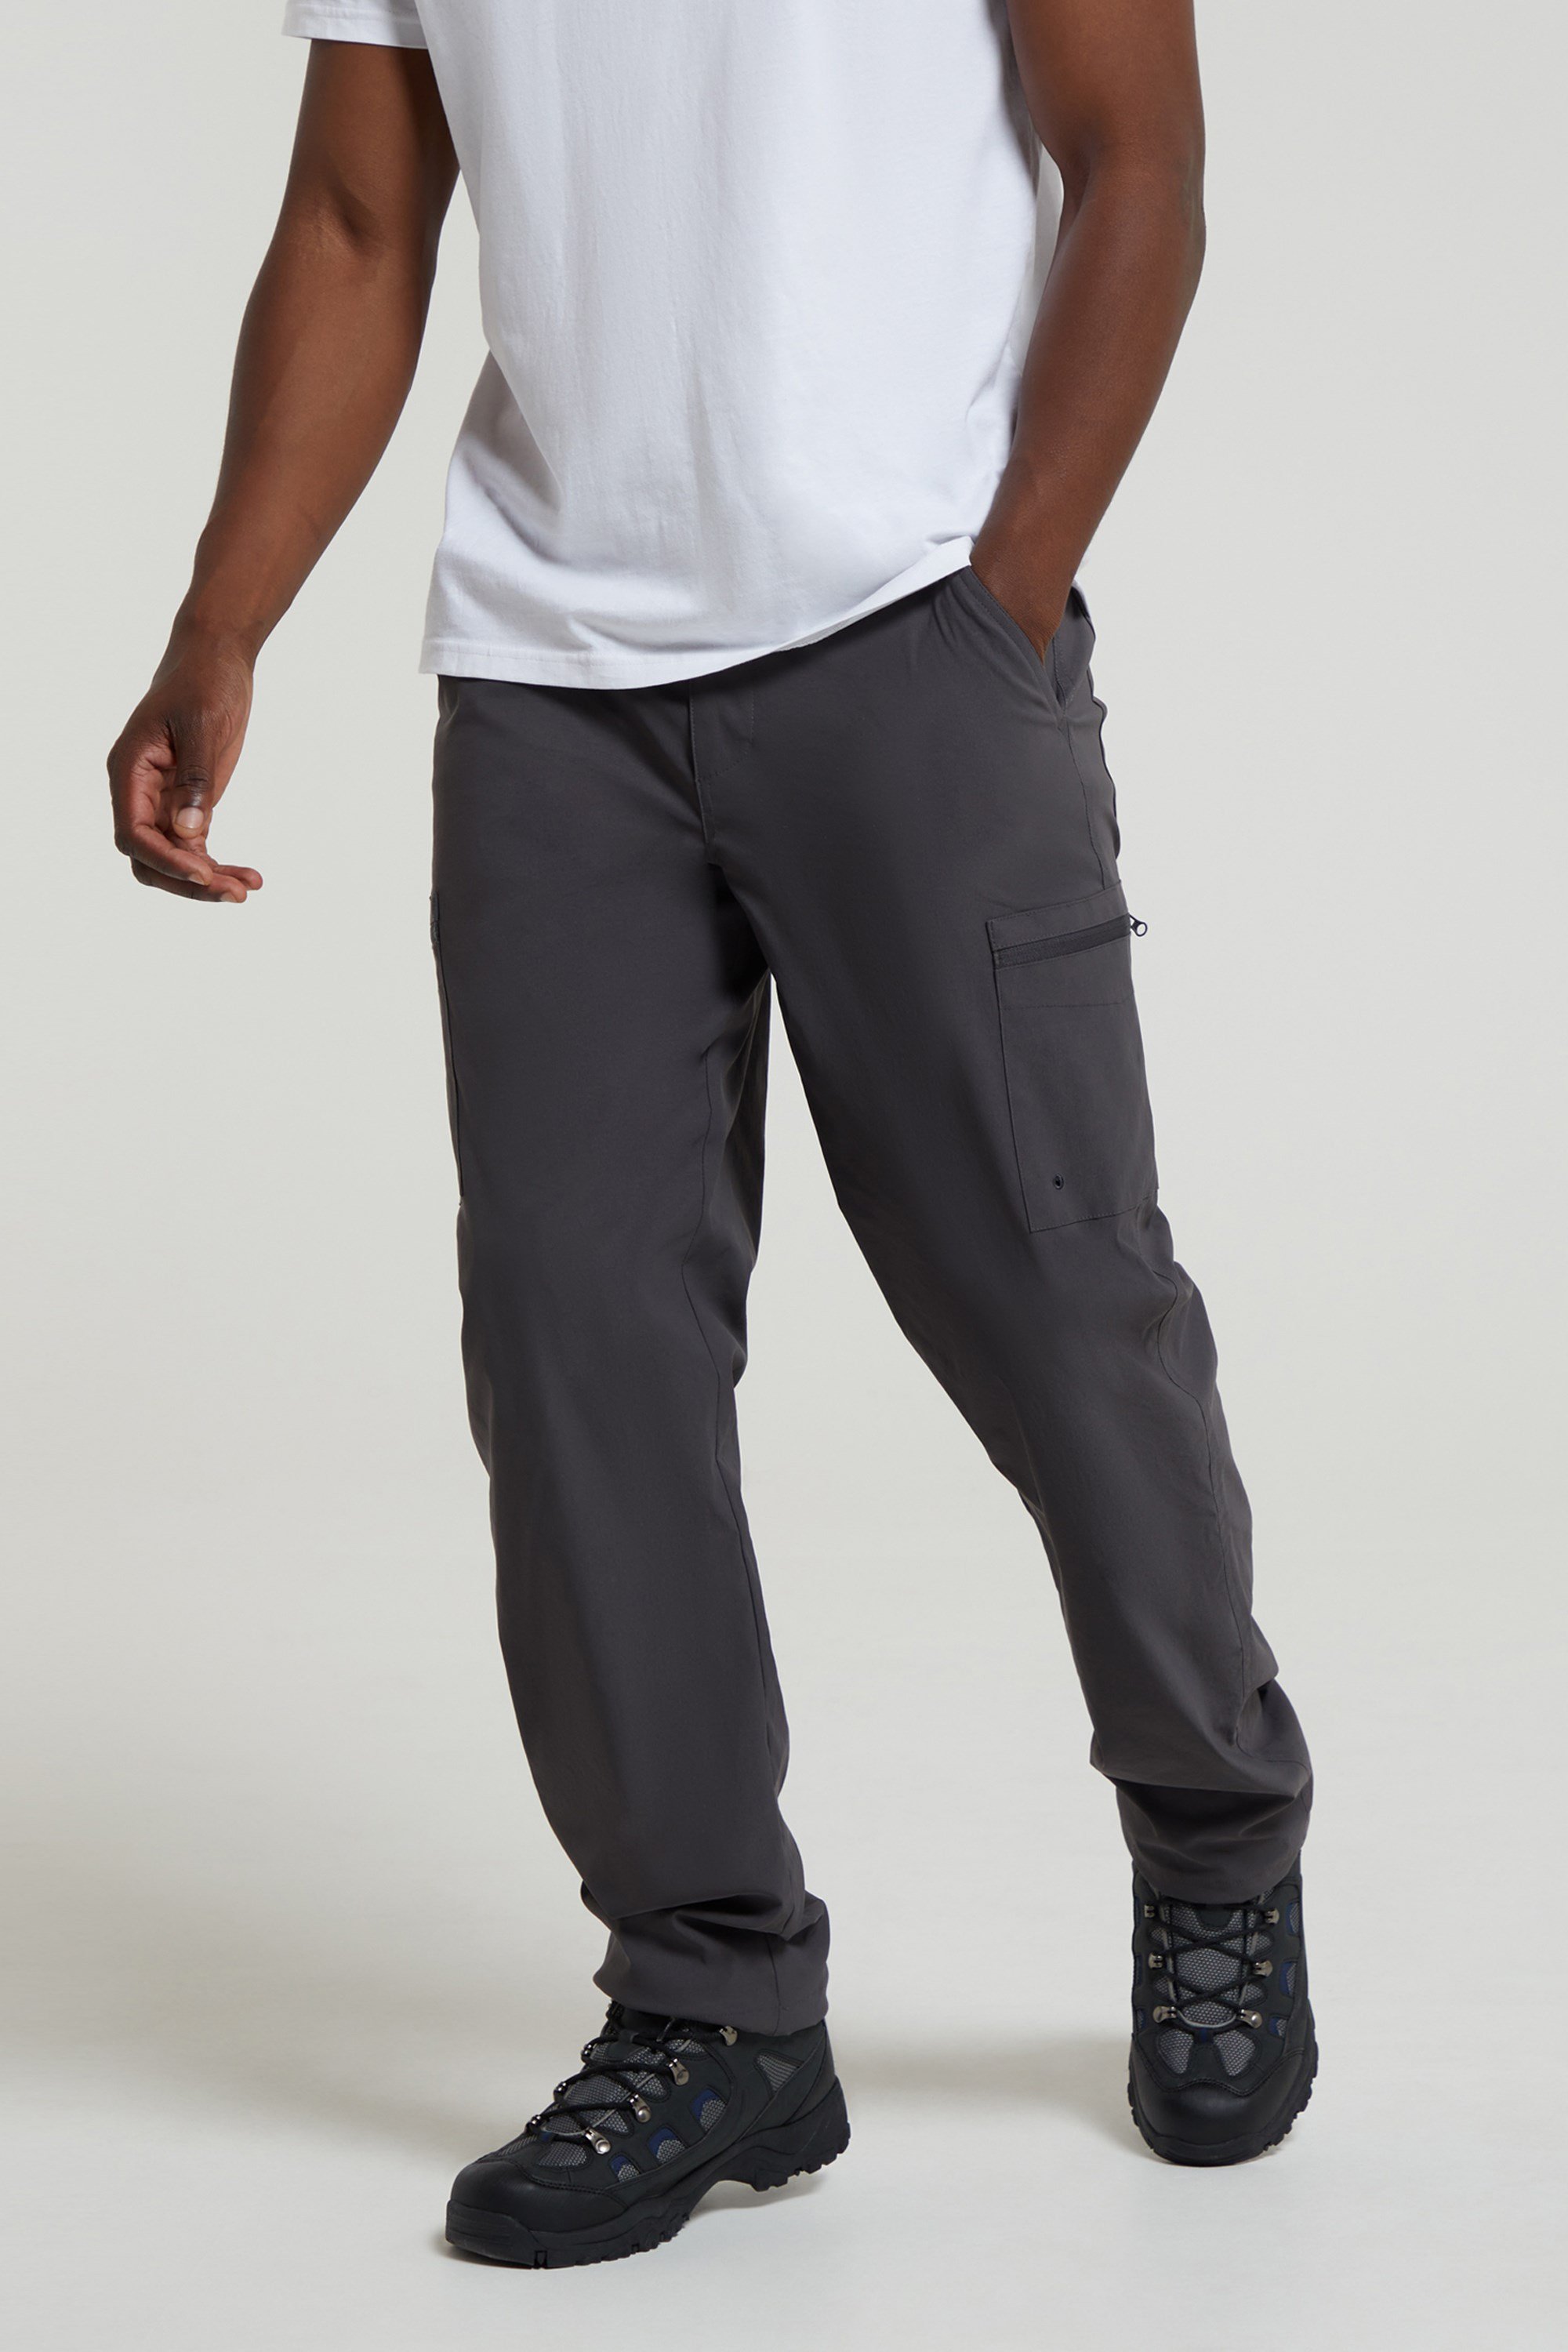 Mountain Warehouse Mens Stretch Winter Hiking Trousers | Discounts on great  Brands